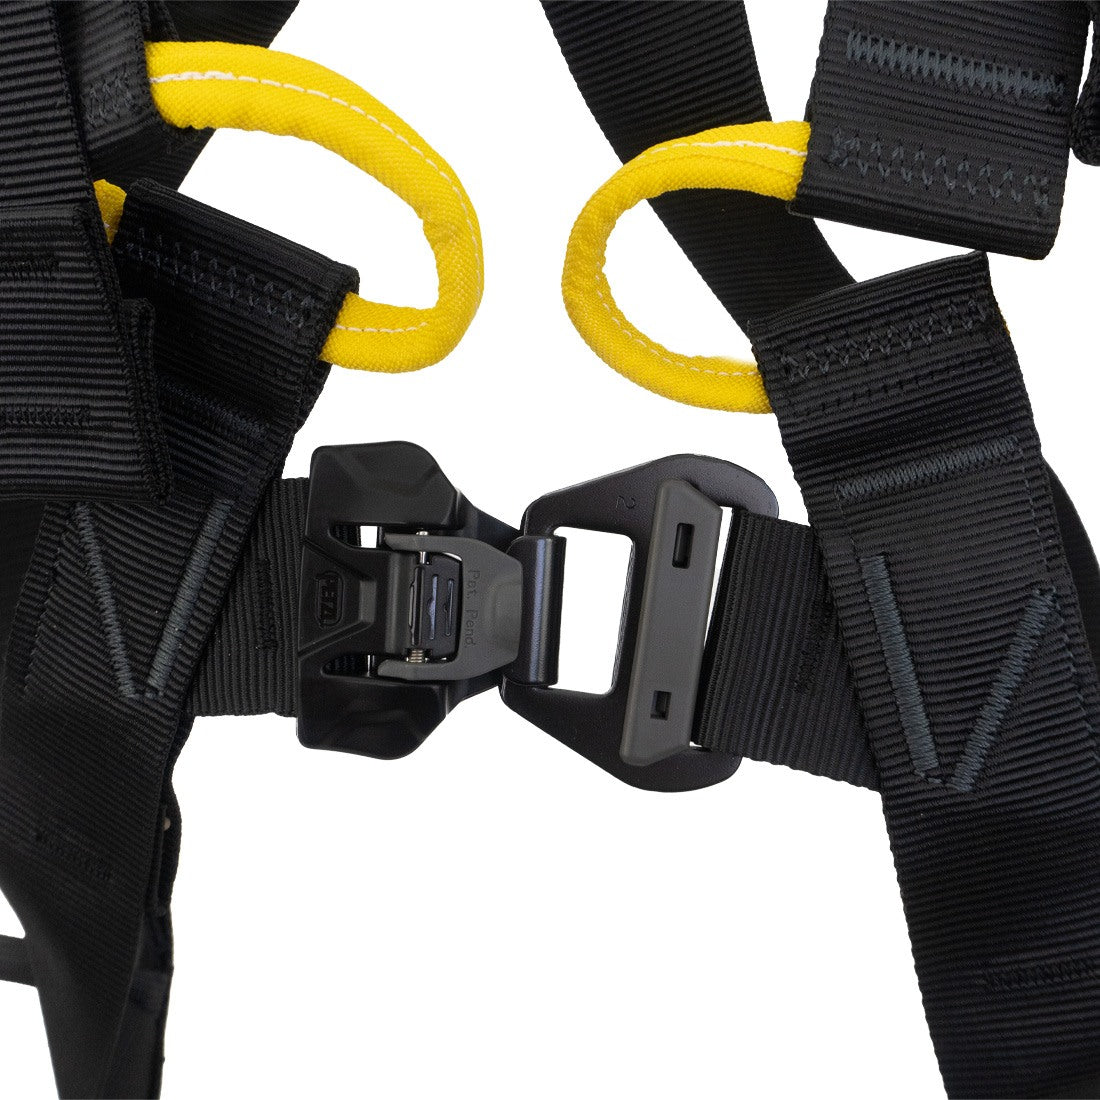 Petzl NEWTON Harness - Size 1 Buckle View